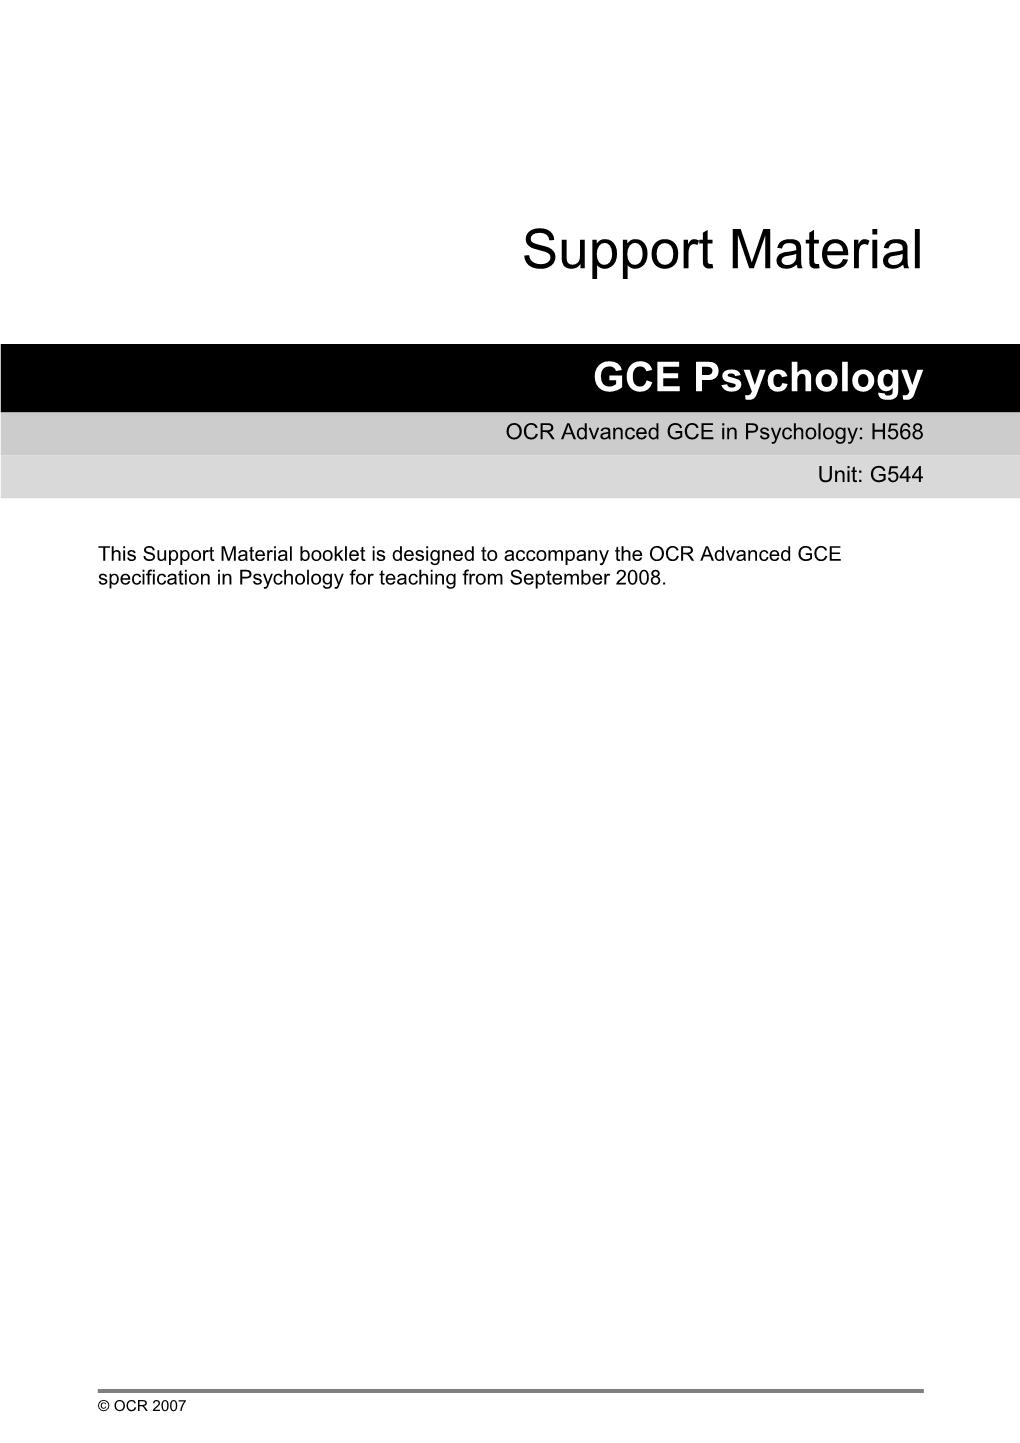 OCR Advanced GCE in Psychology: H568